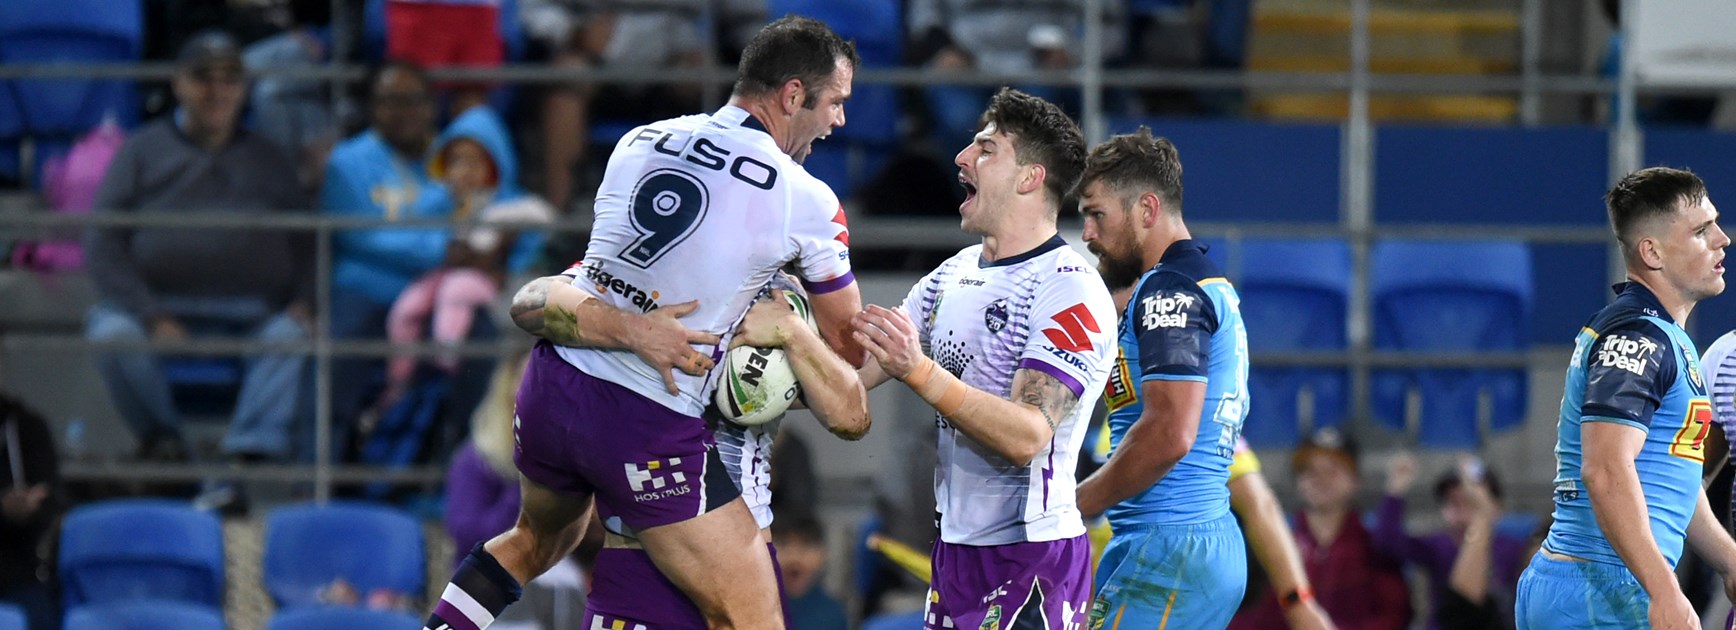 The Storm celebrate Cameron Munster's try against the Titans.